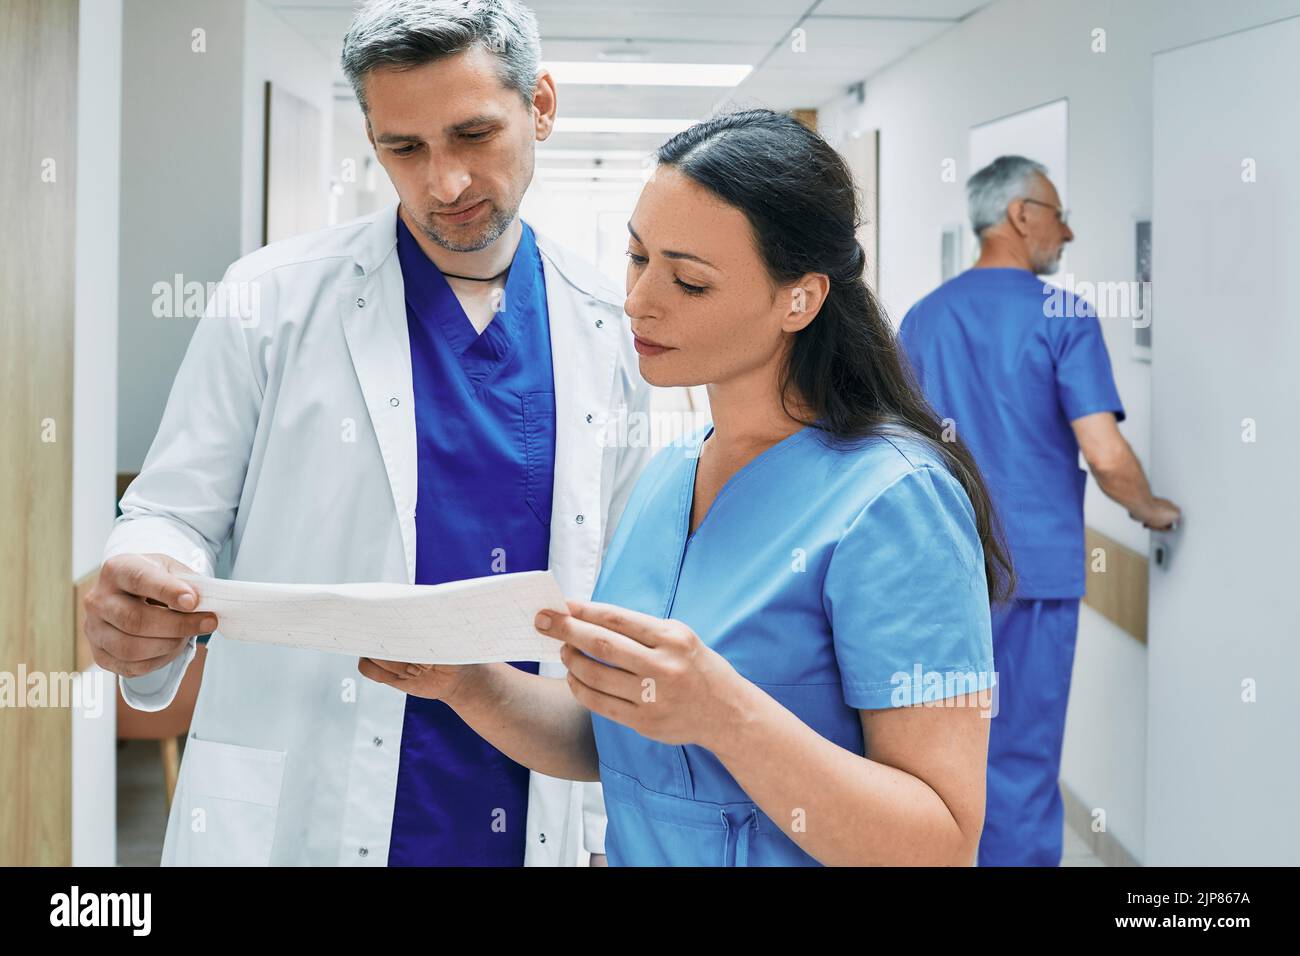 Experienced cardiologist with female nurse analyzing patient cardiogram. Department of cardiology at hospital Stock Photo